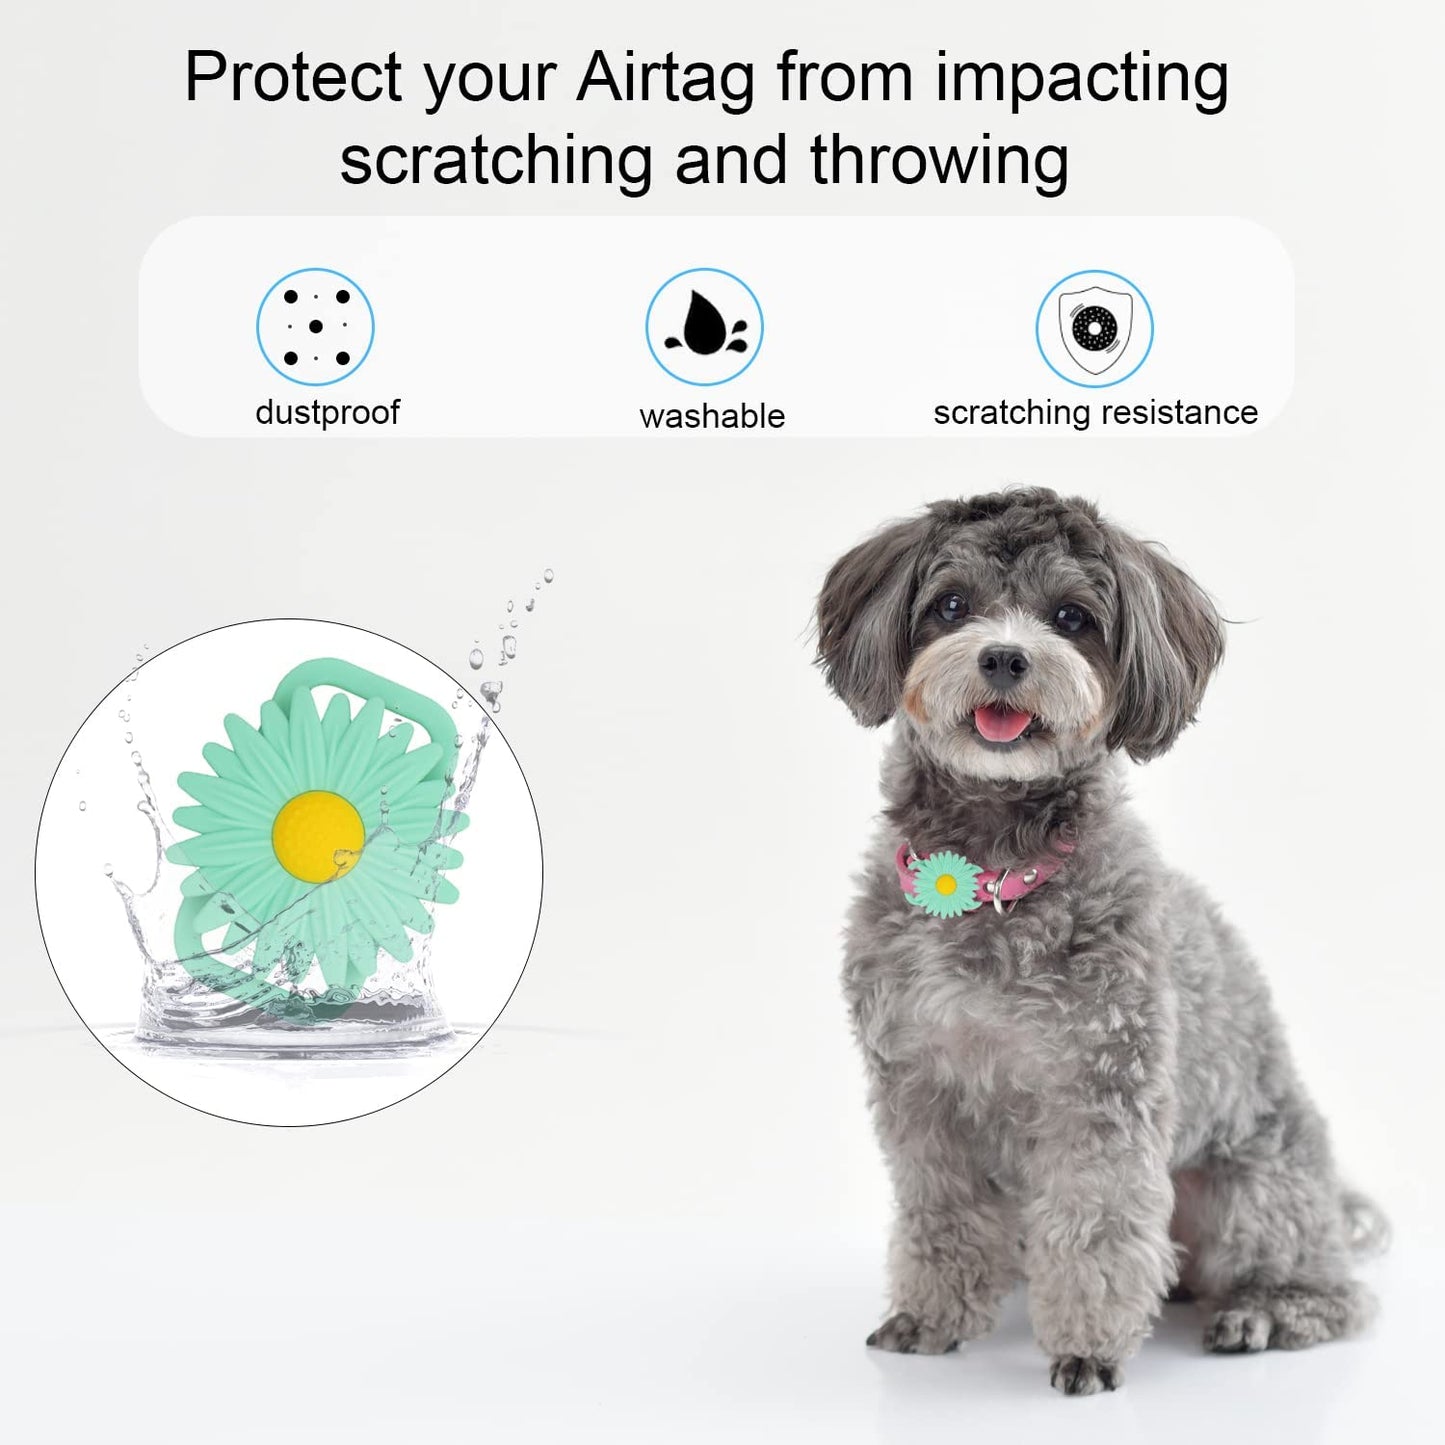 Airtag Cat Collar Holder for Apple Air Tag Cat Collar Holder within 0.6 Inch, Airtag Dog Collar Holder, Airtag Pet Collar Holder for Apple Airtag Collar Small Airtag Protector